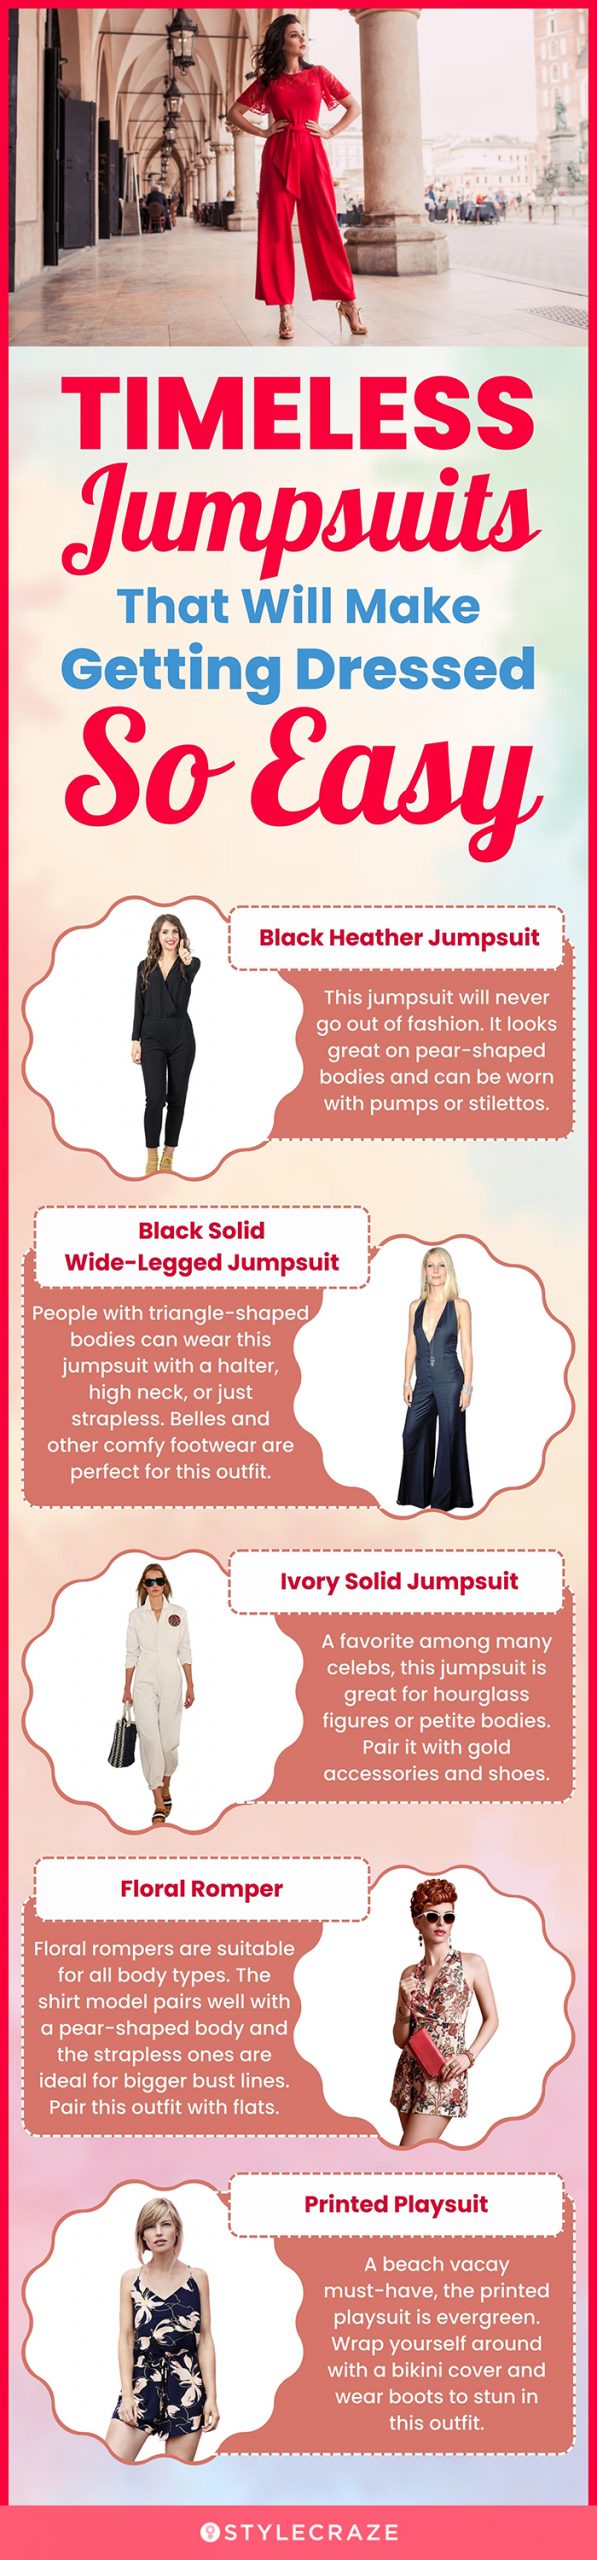 16 Different Types of Jumpsuits Designs: Name with Photos - LooksGud.com-hkpdtq2012.edu.vn